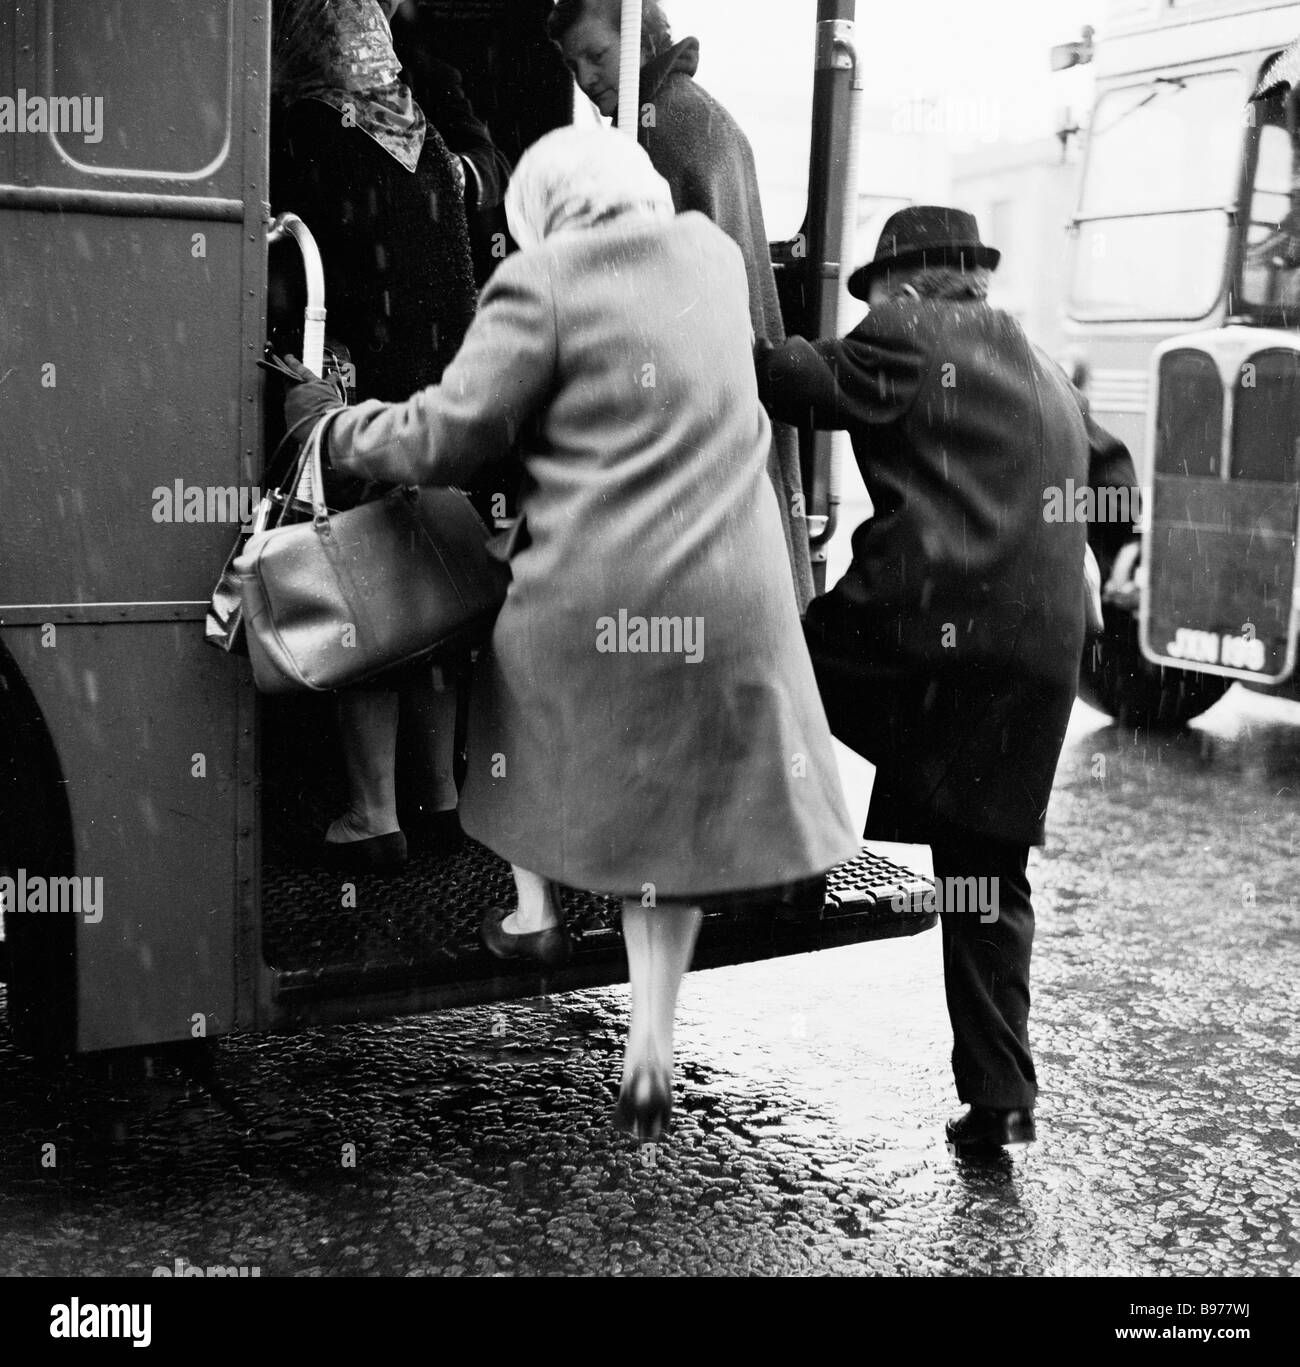 1950s, winter time, an elderly man and woman grap the hand-rails and step up onto the open rear platform of a double-decker bus, London, England, UK. Stock Photo